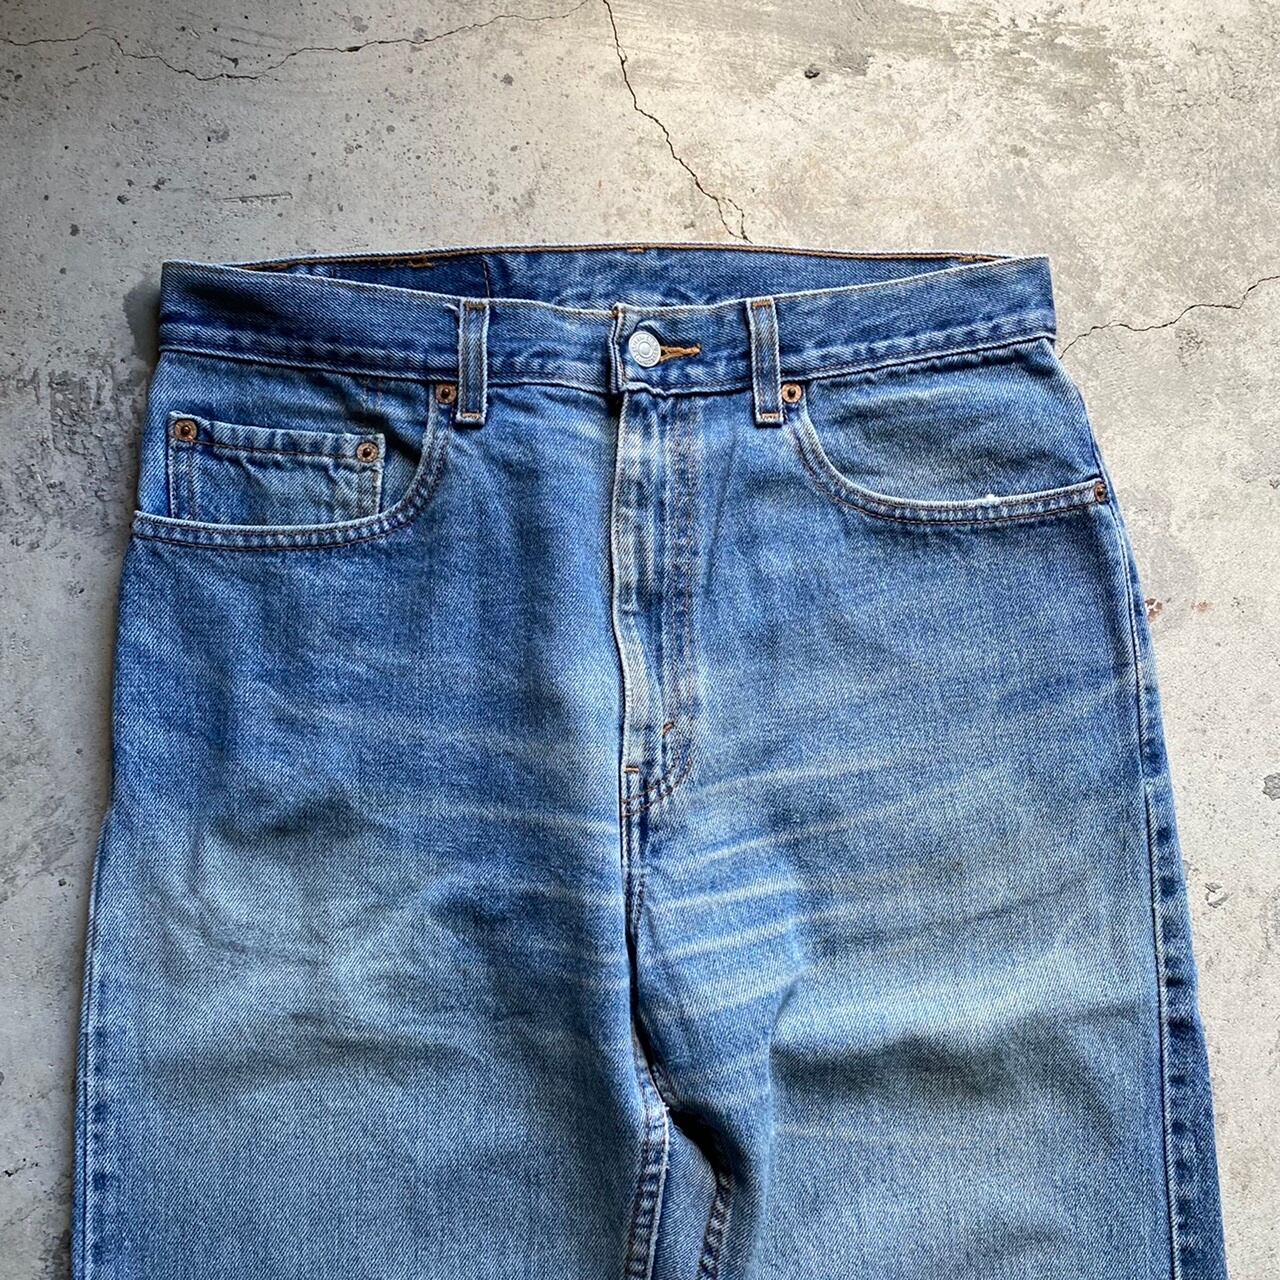 USED 古着Levi's 90s リーバイス505 メキシコ製　ヴィンテージ | magazines webshop powered by BASE